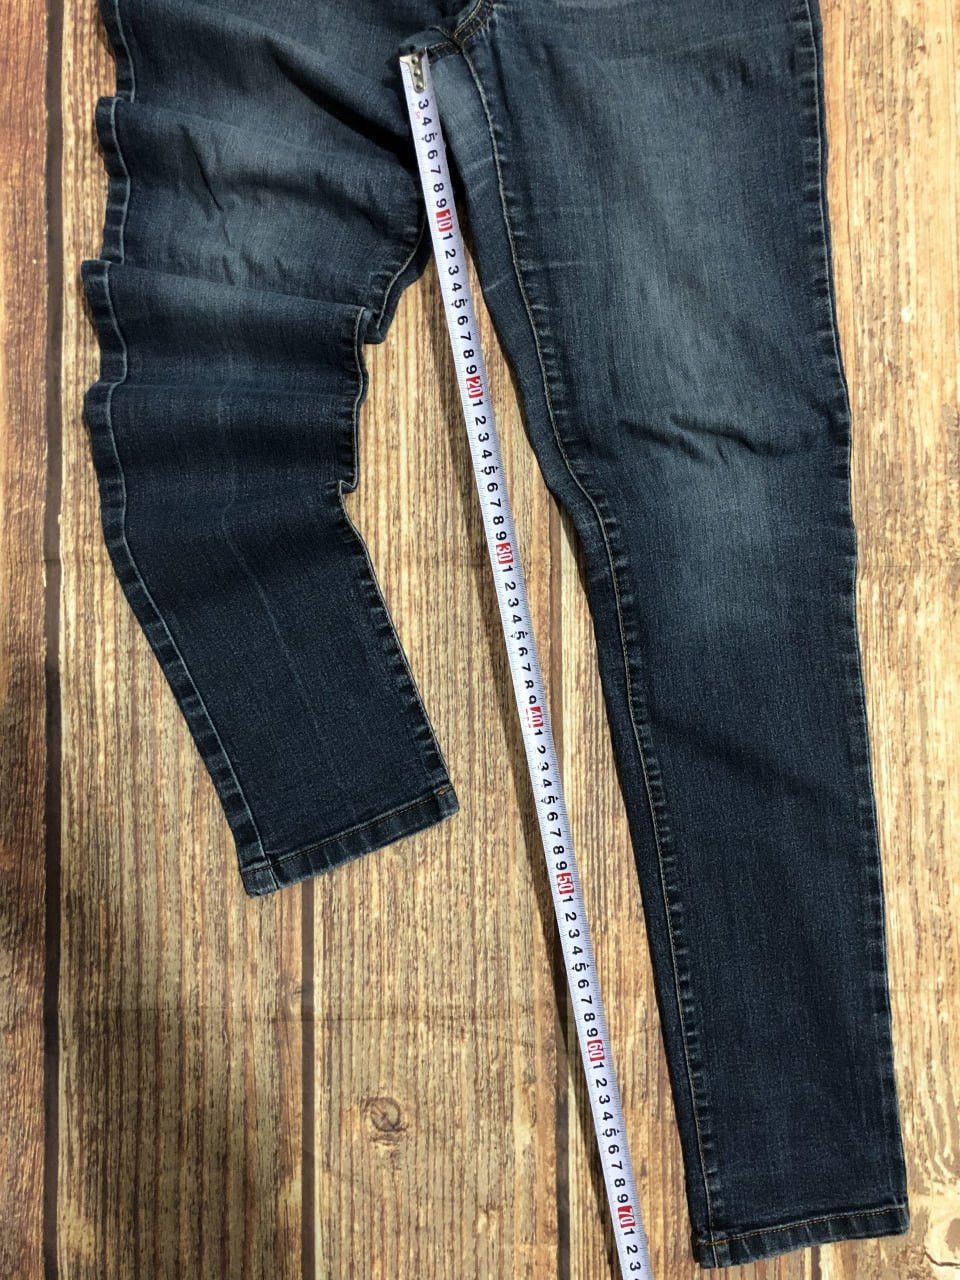 Archival Clothing Balenciaga Style Dolce & Gabbana Distressed Flared Jeans Size US 30 / EU 46 - 21 Preview